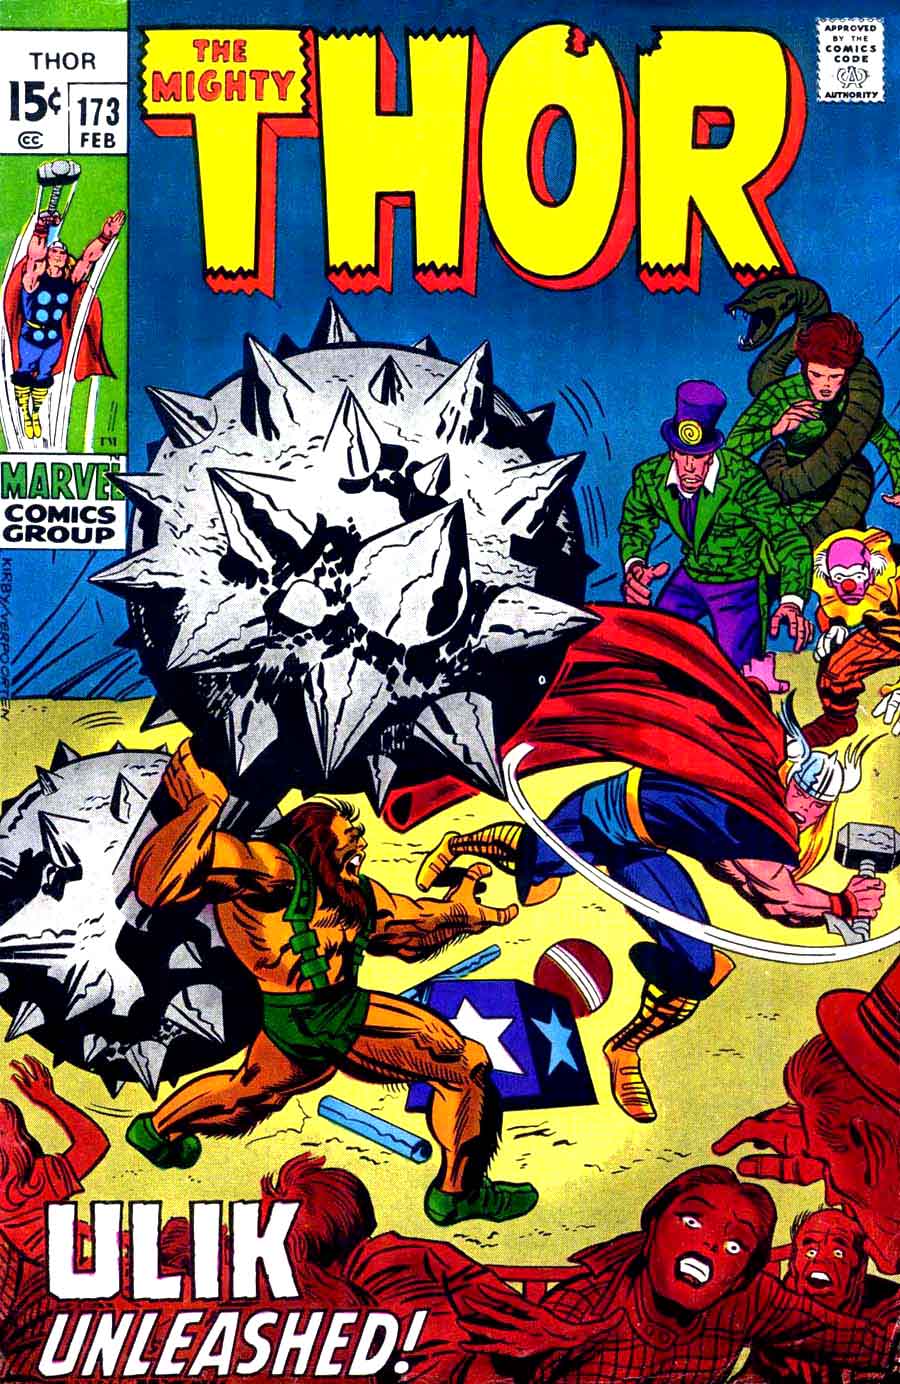 Thor v1 #173 marvel comic book cover art by Jack Kirby